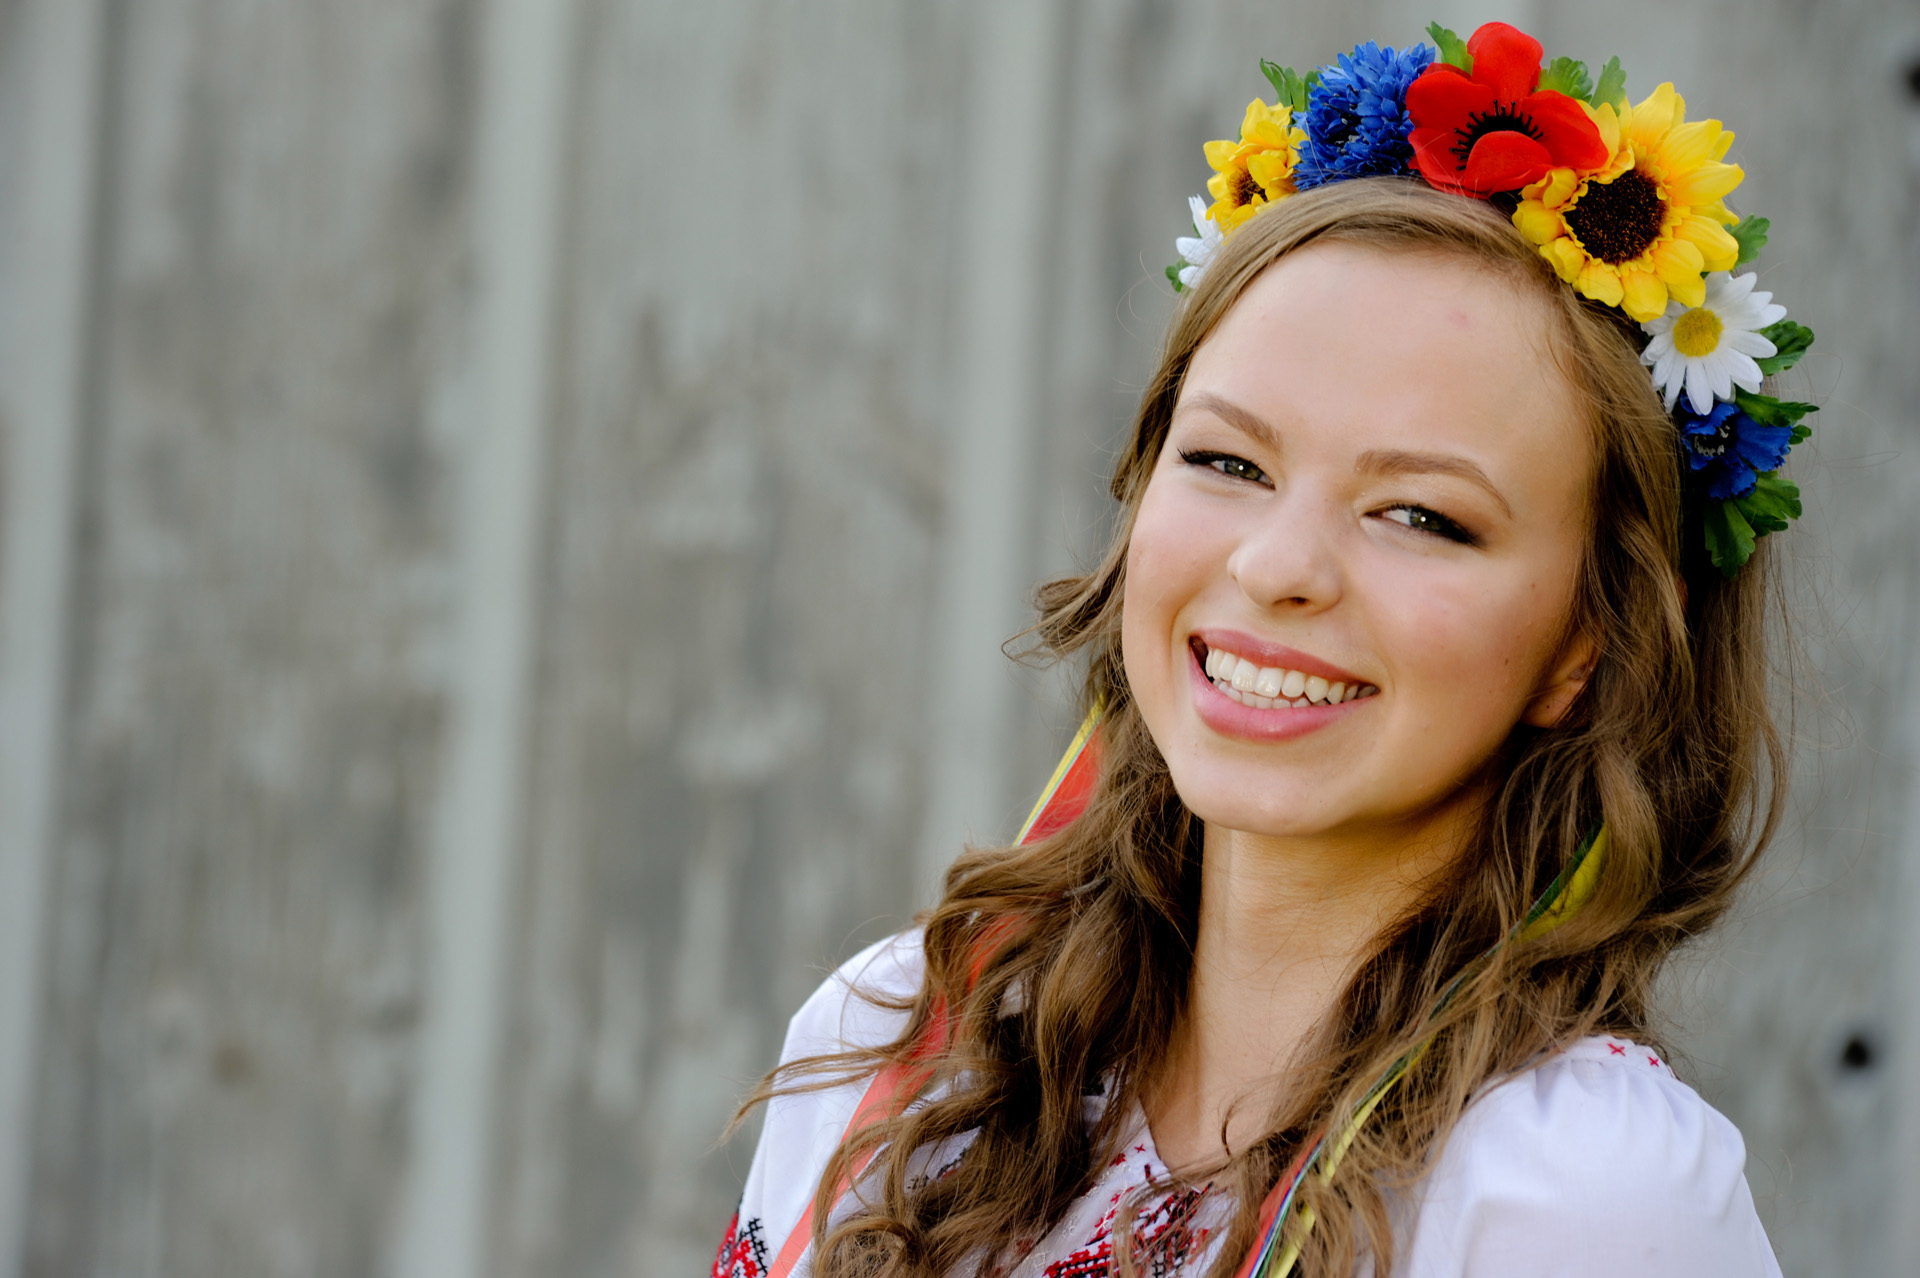 Troy , Michigan senior pictures photo of a high school senior posing in her traditional Russian dance outfit for her senior pictures in Troy, Michigan.